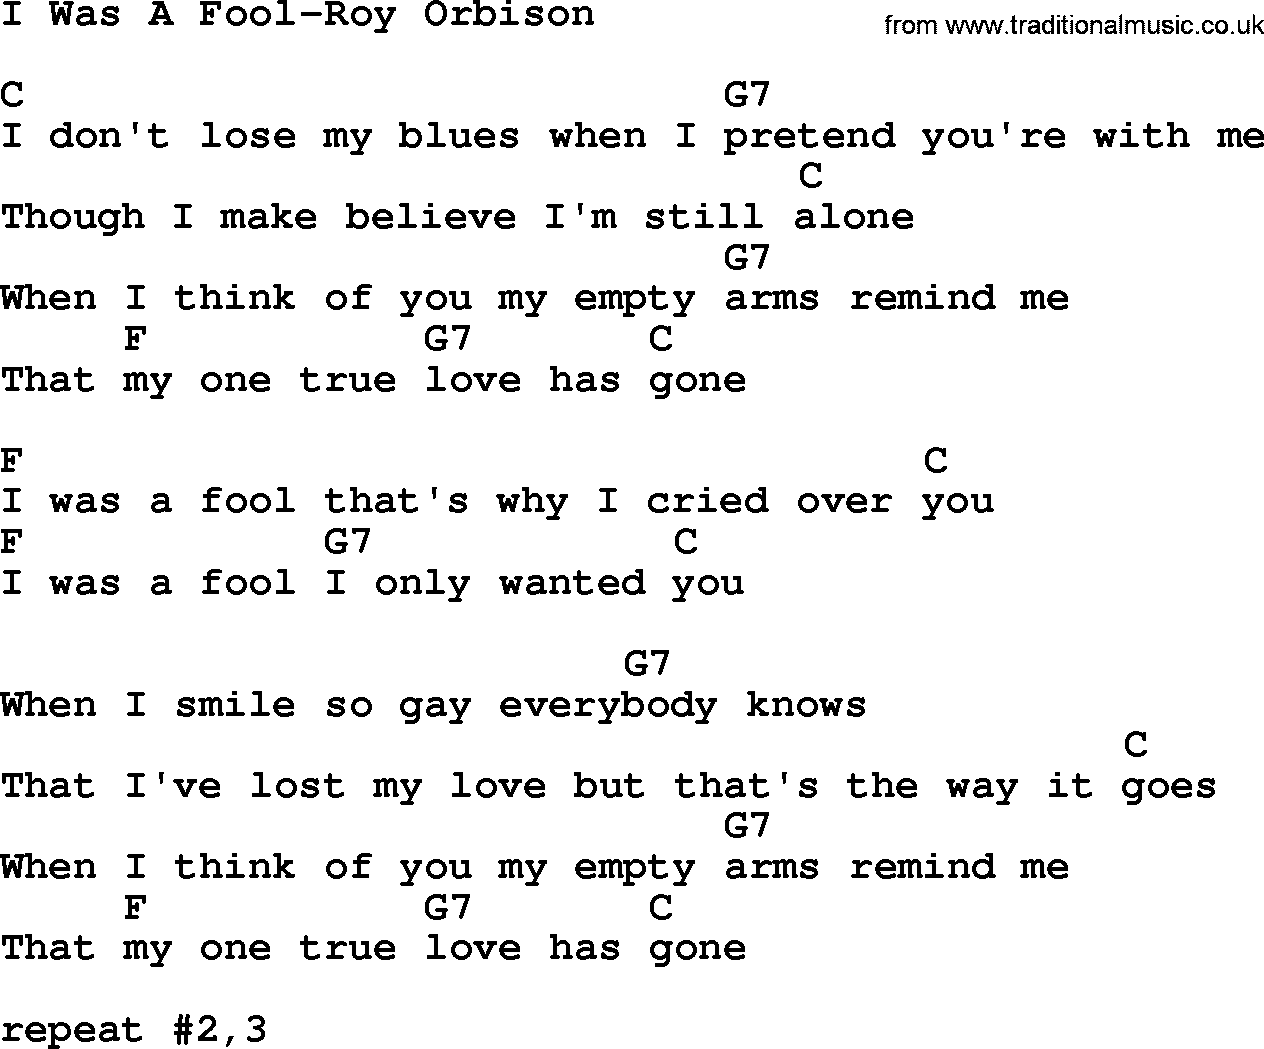 Country music song: I Was A Fool-Roy Orbison lyrics and chords